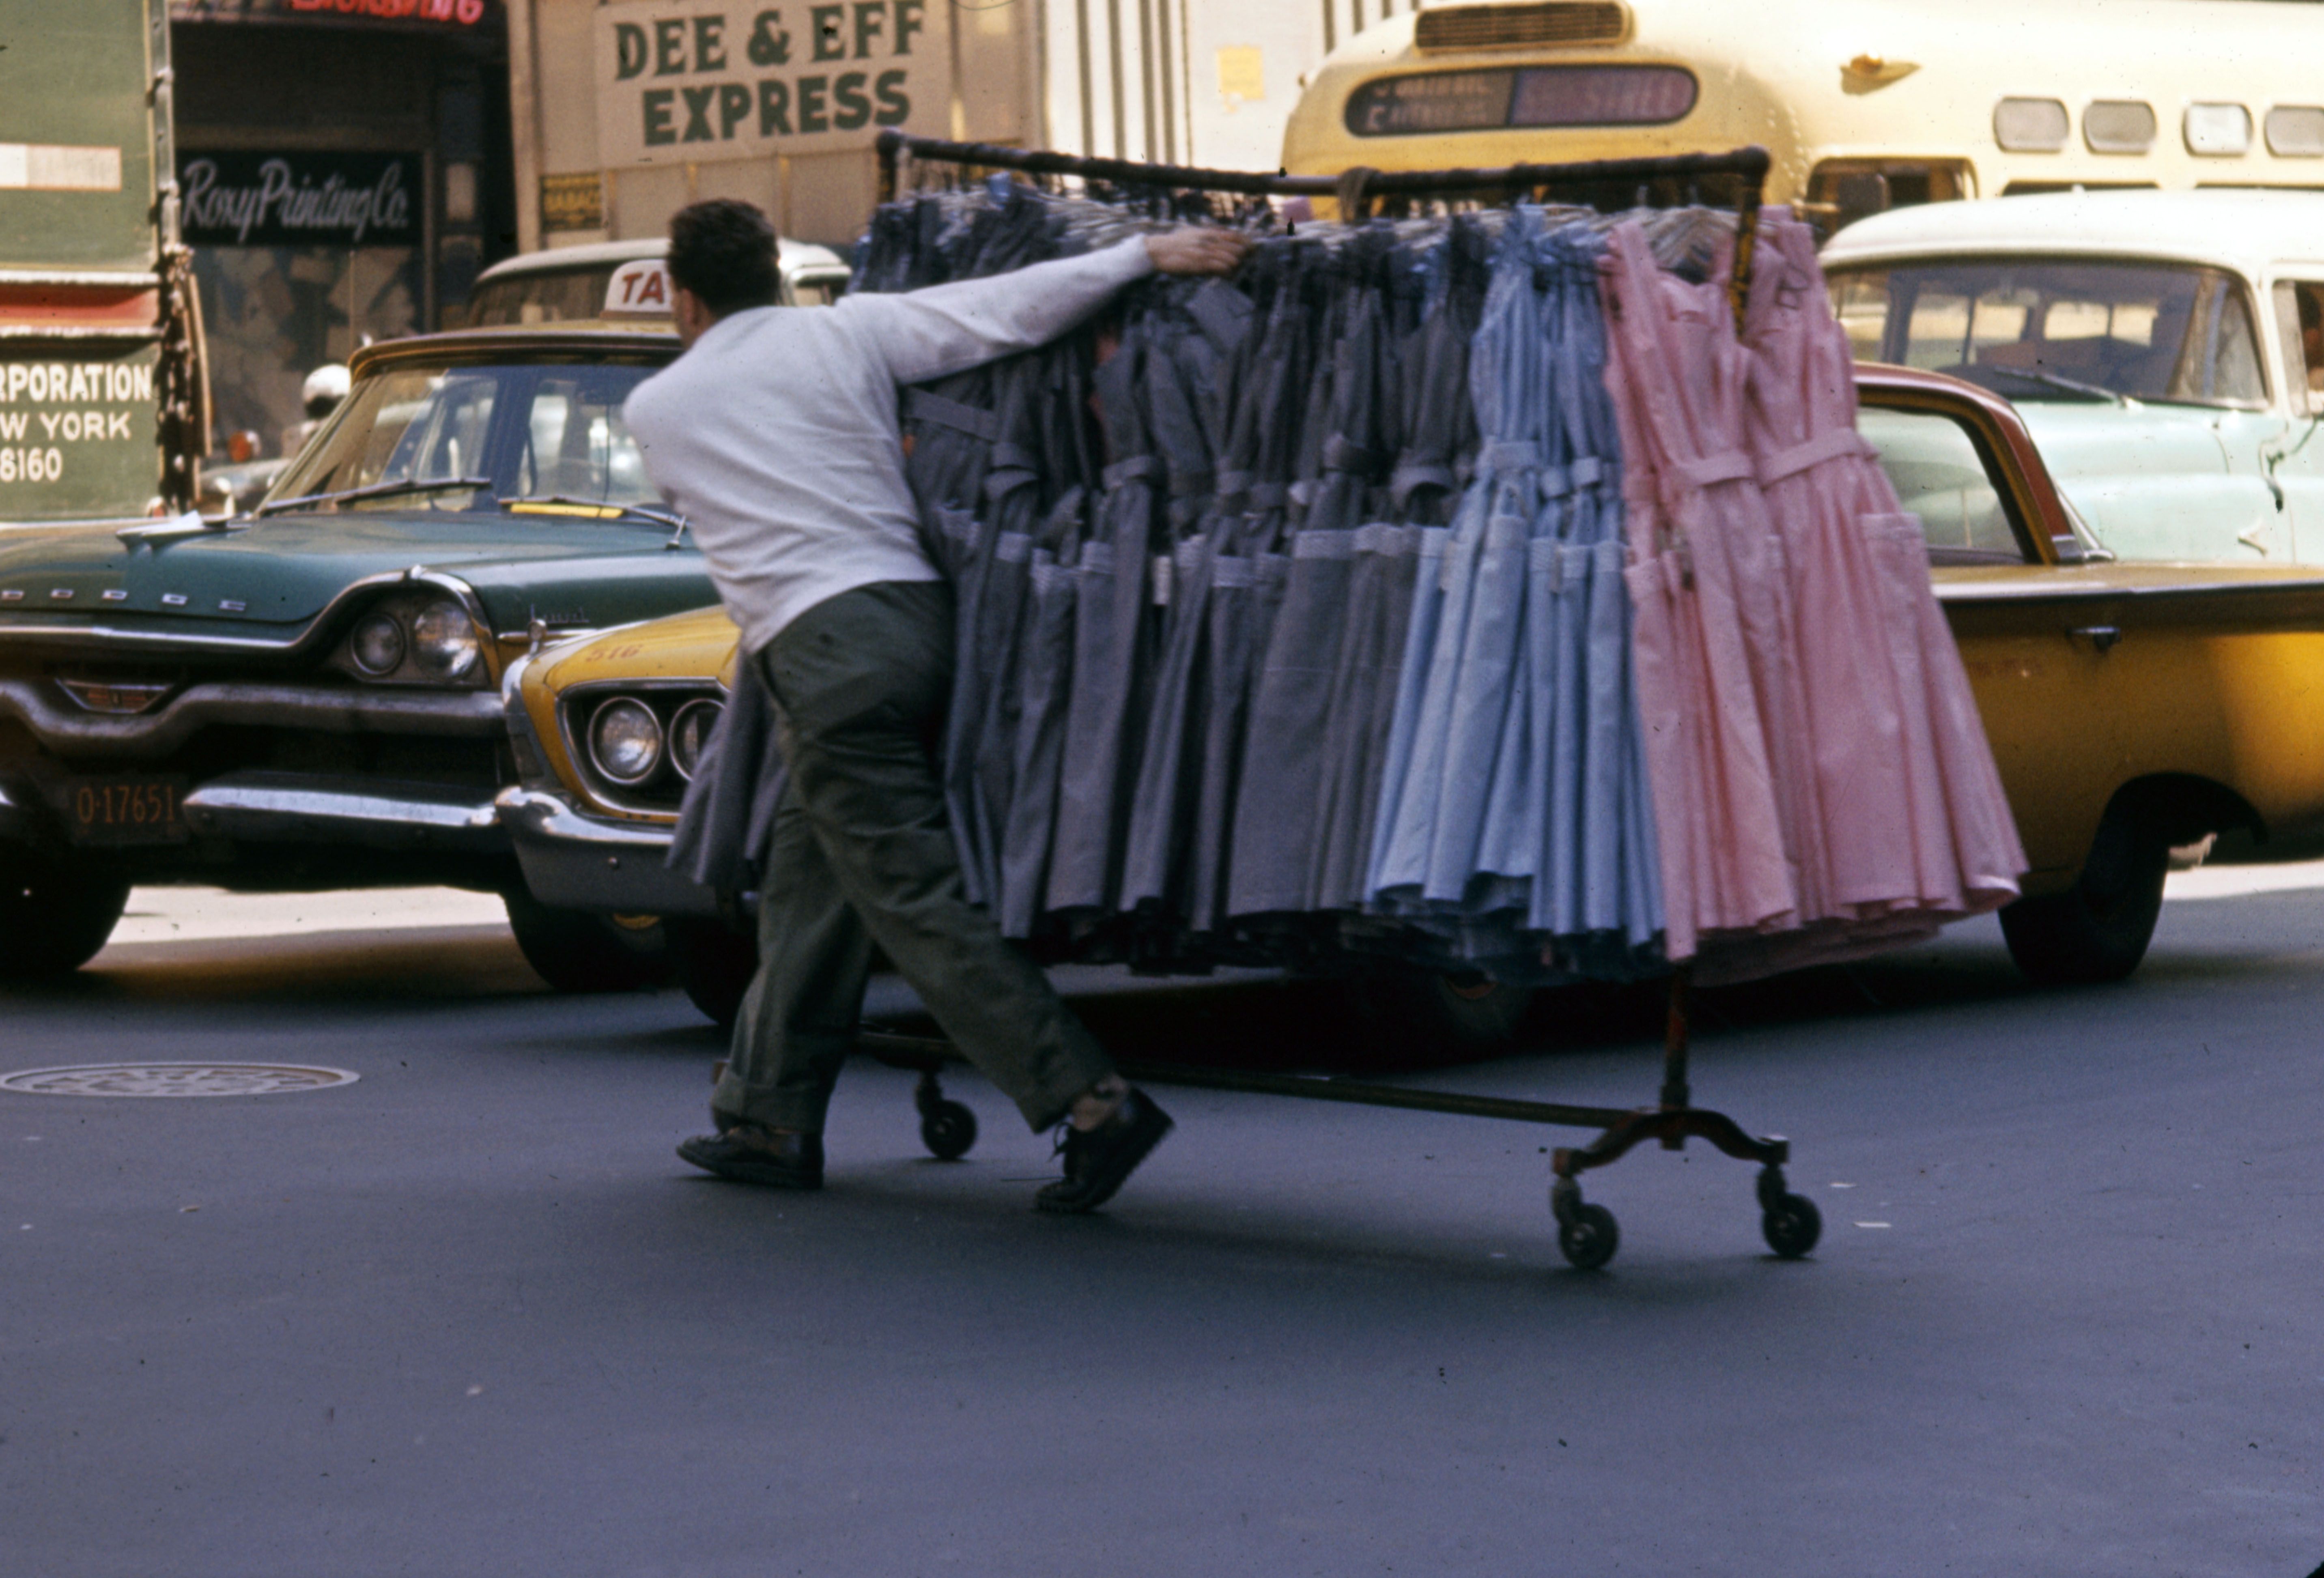 1960s color photography